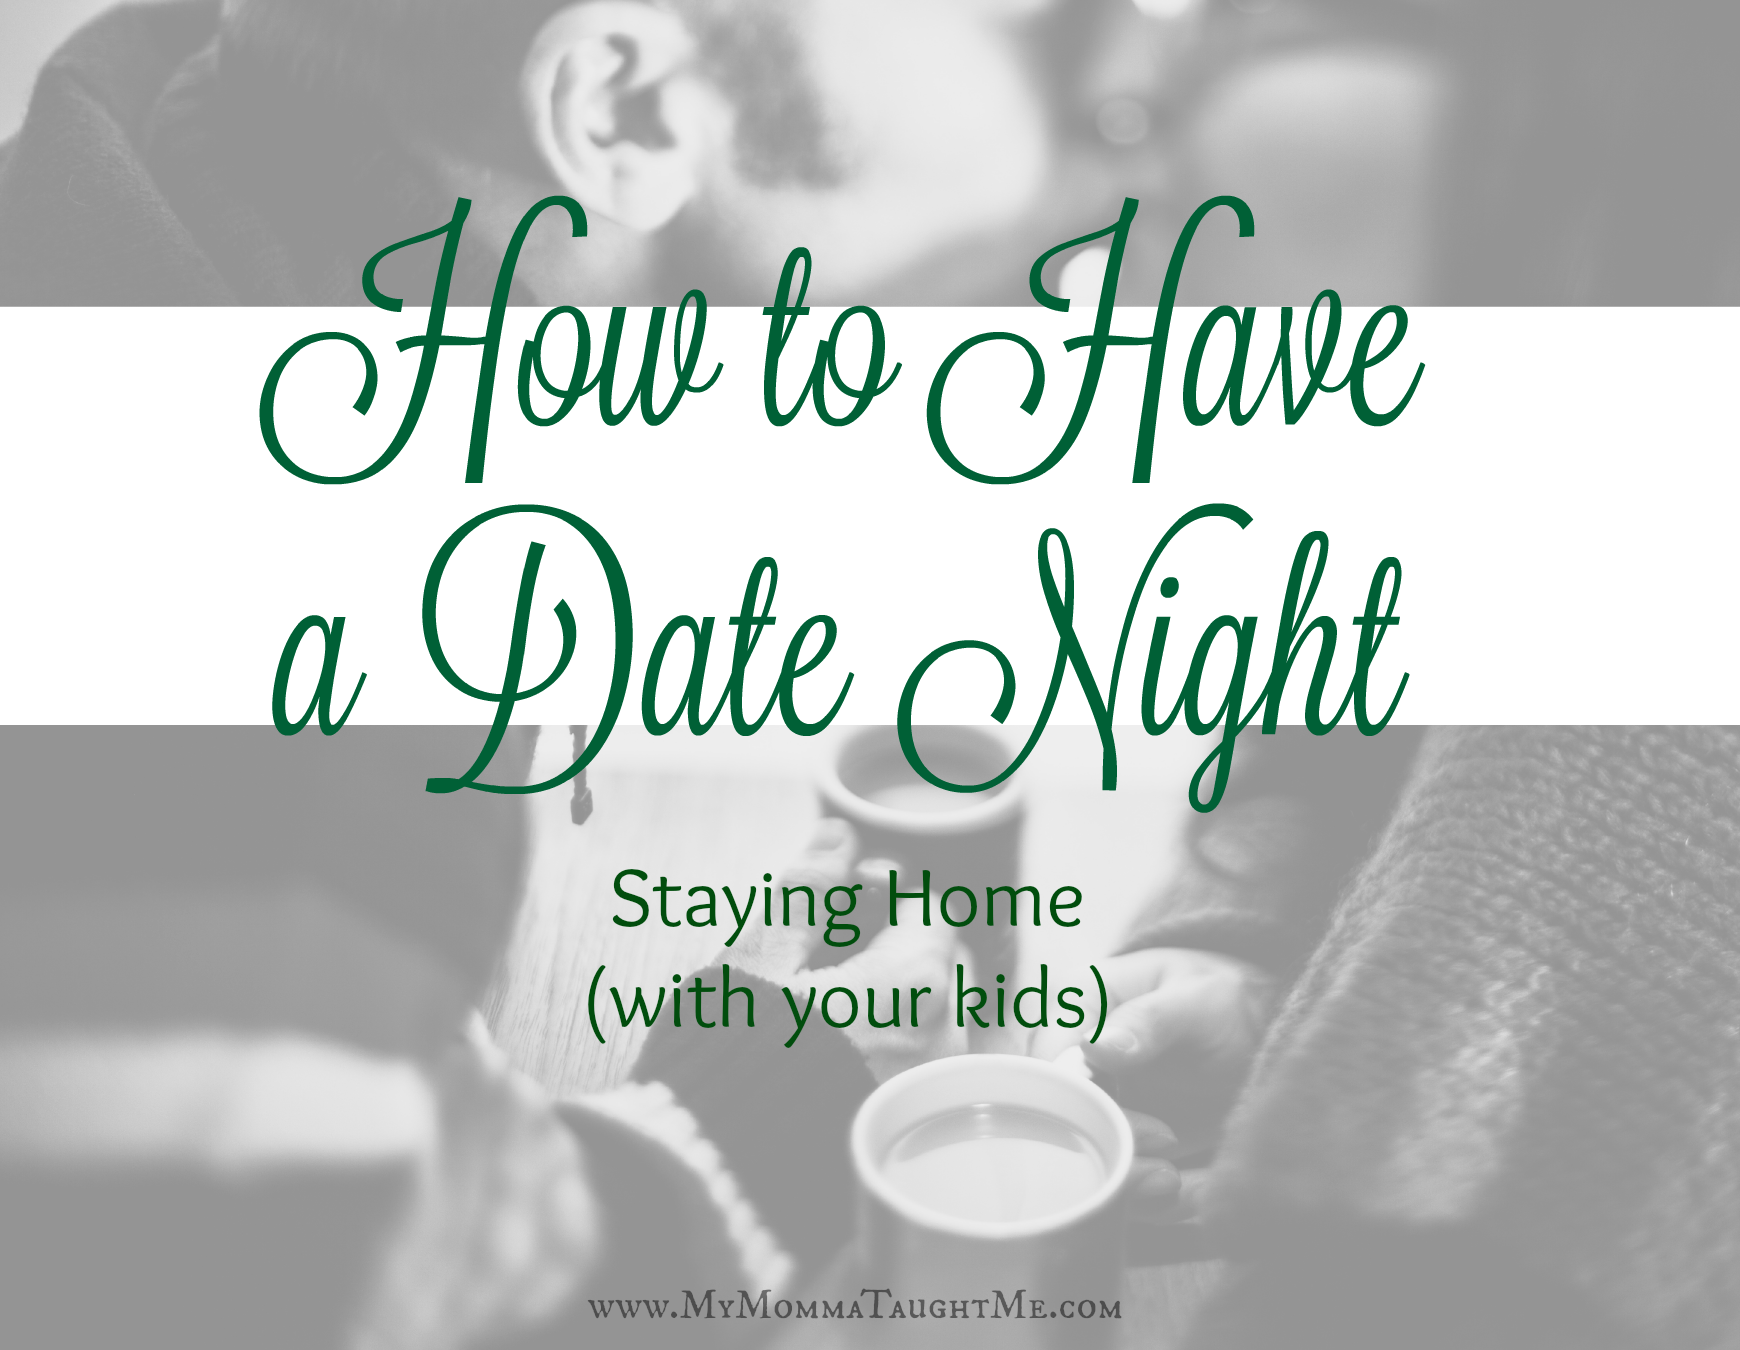 How to Have a Date Night